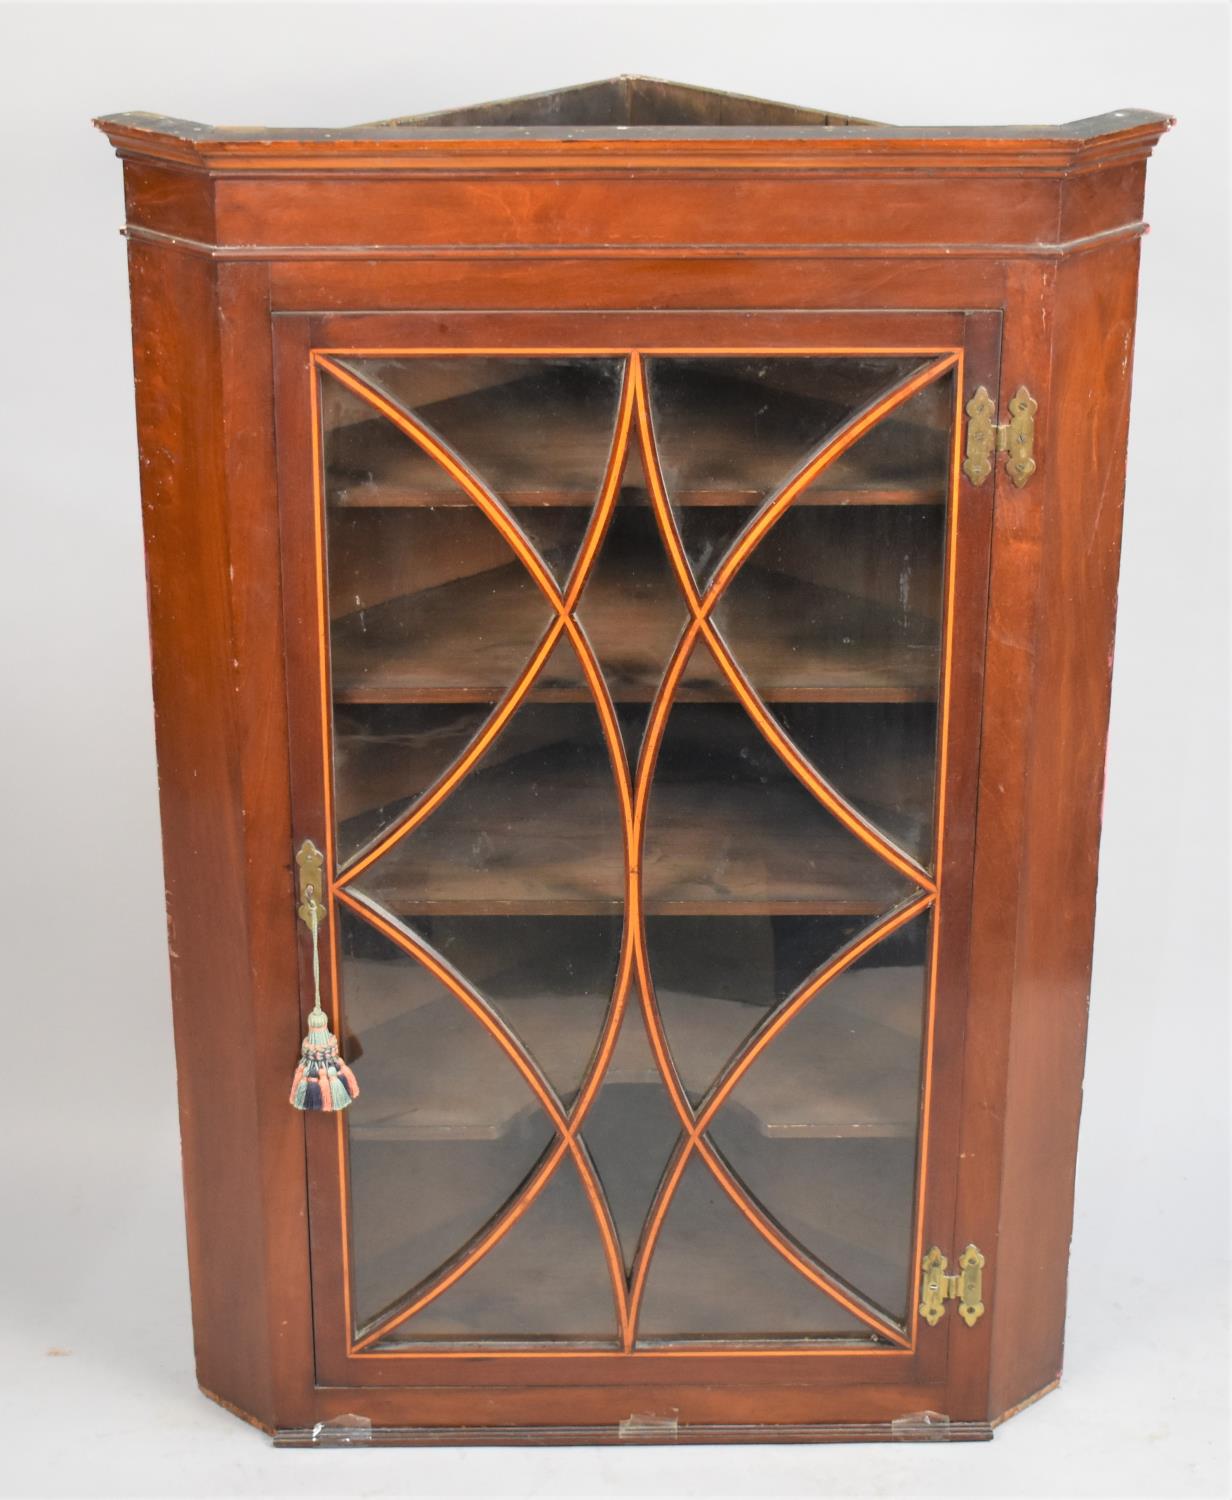 A Late 19th Century Mahogany Glazed Wall Hanging Corner Cabinet with Shelved Interior, 78cm wide